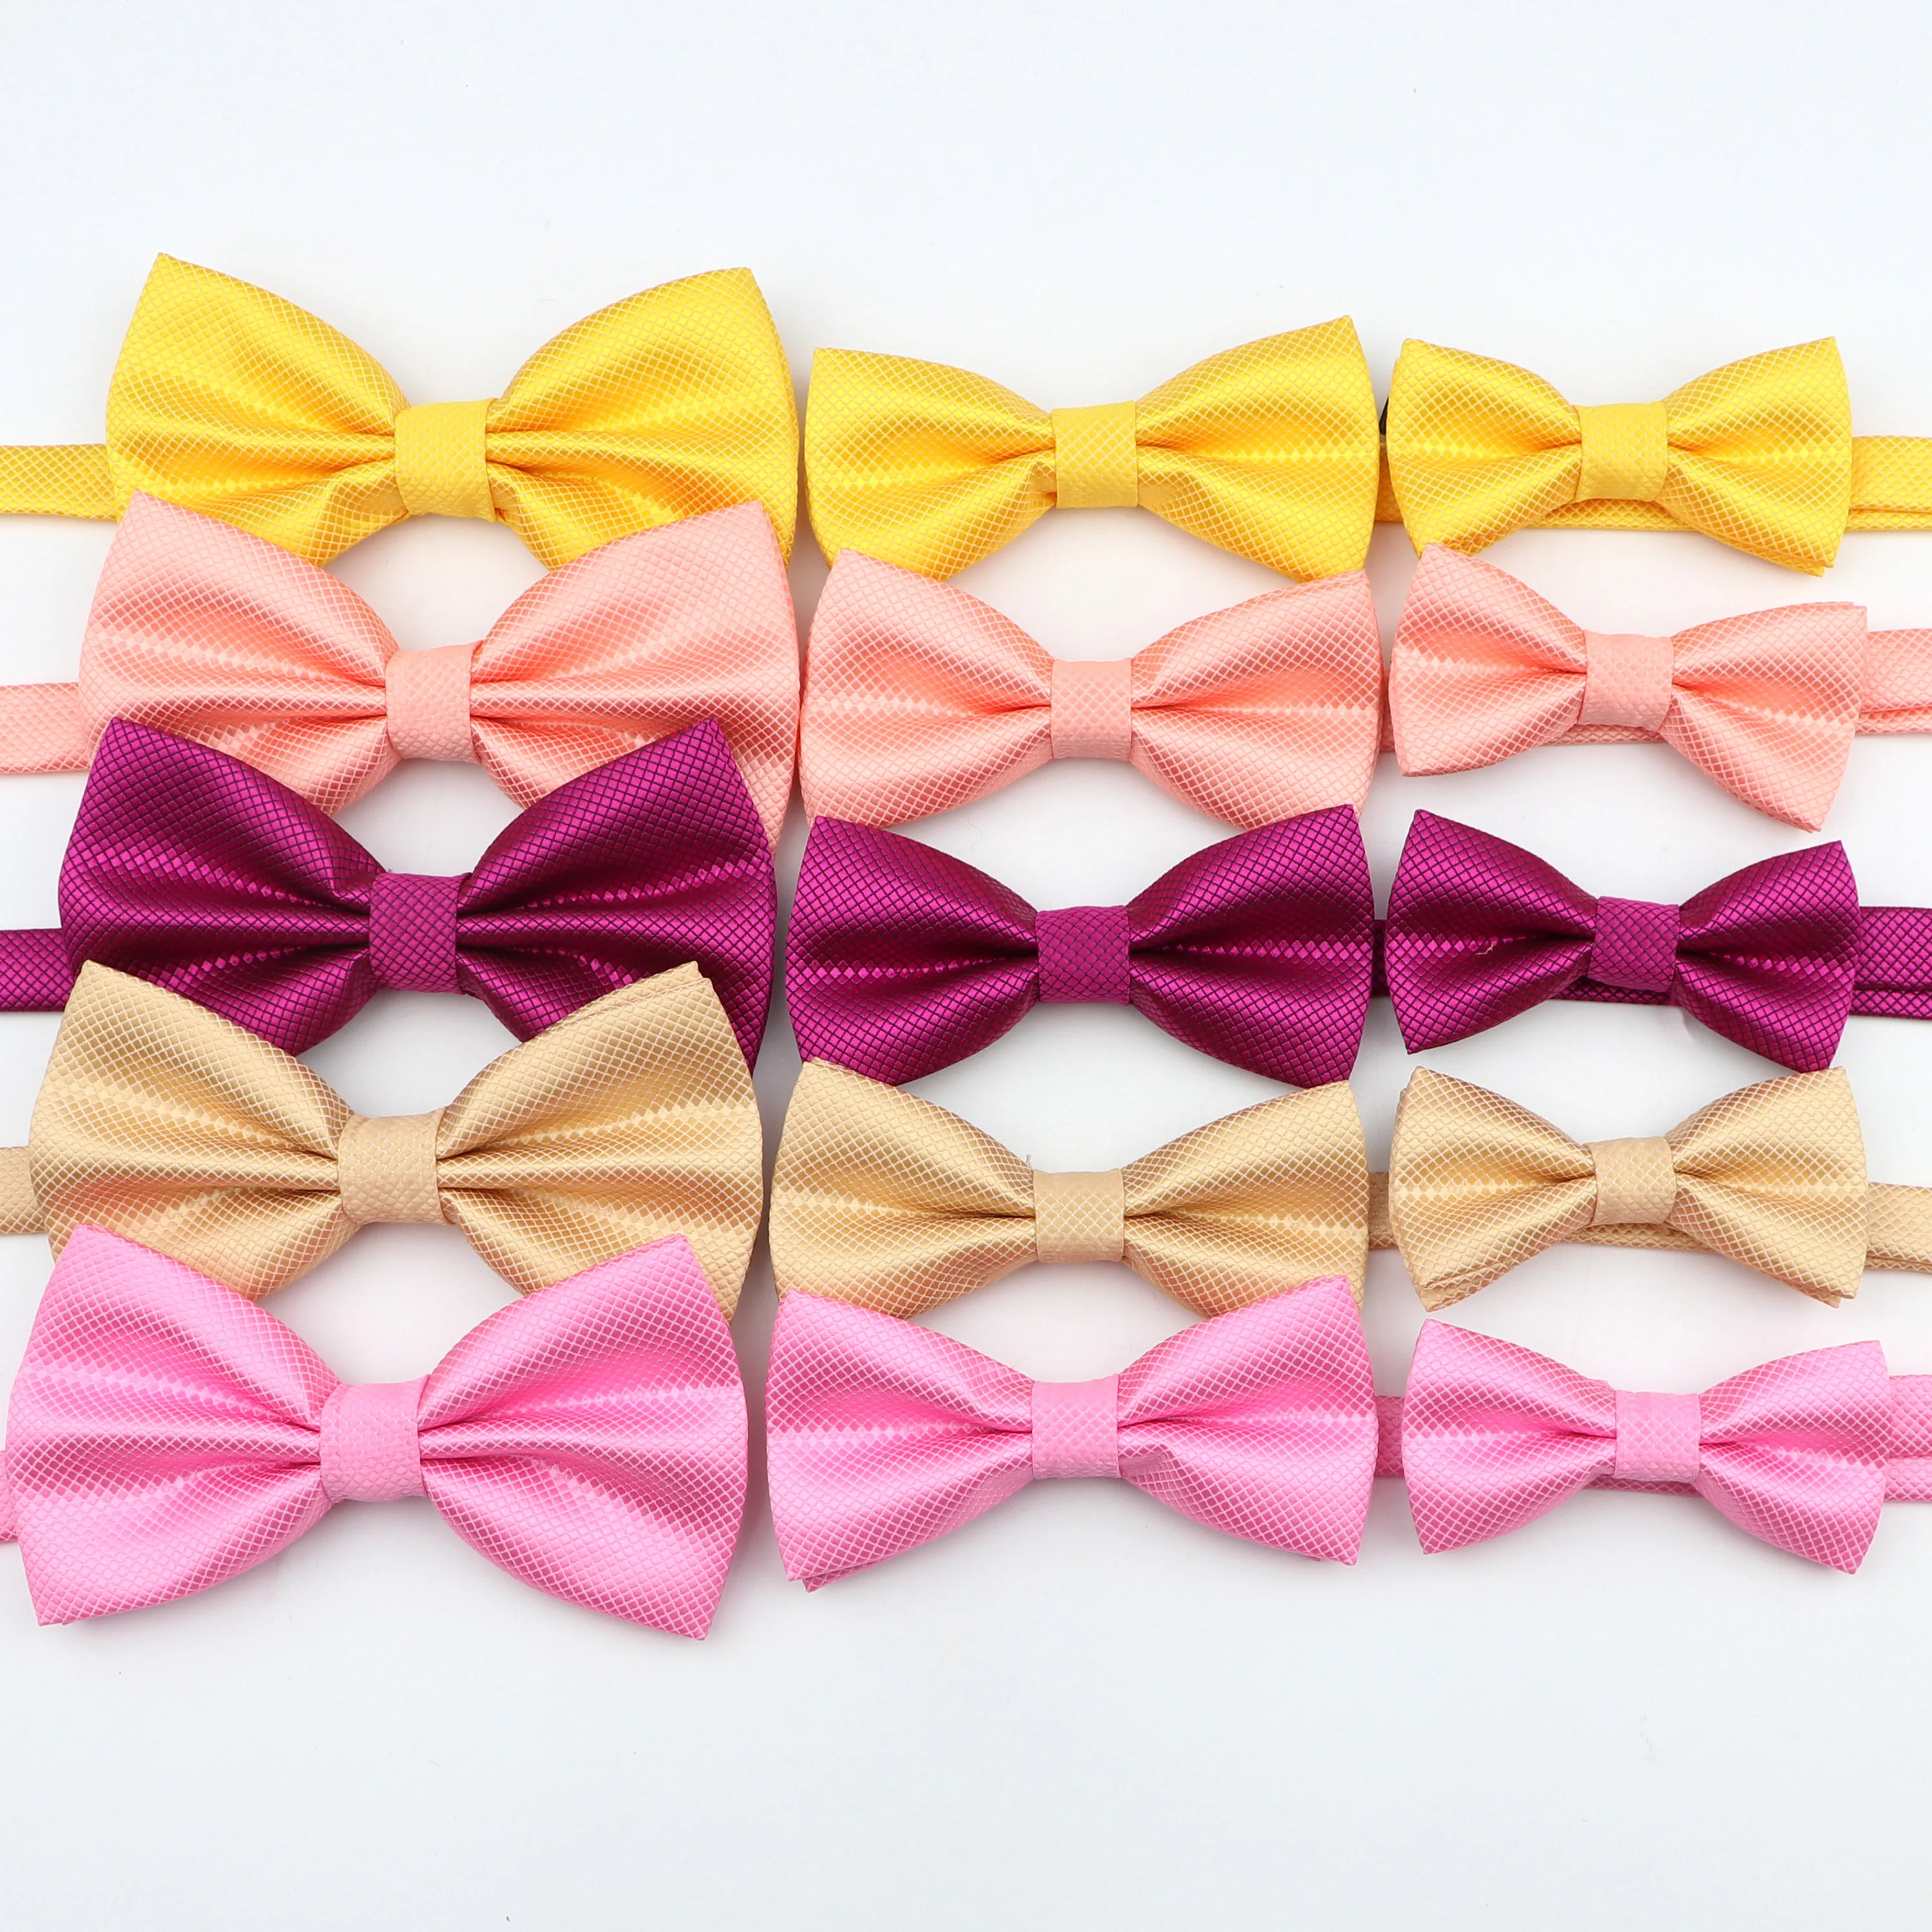 3 Size Parent-Child Bowtie Set Solid Colour Kids Pets Chic Family Butterfly Party Dinner Wedding Design Cute bow tie Accessory